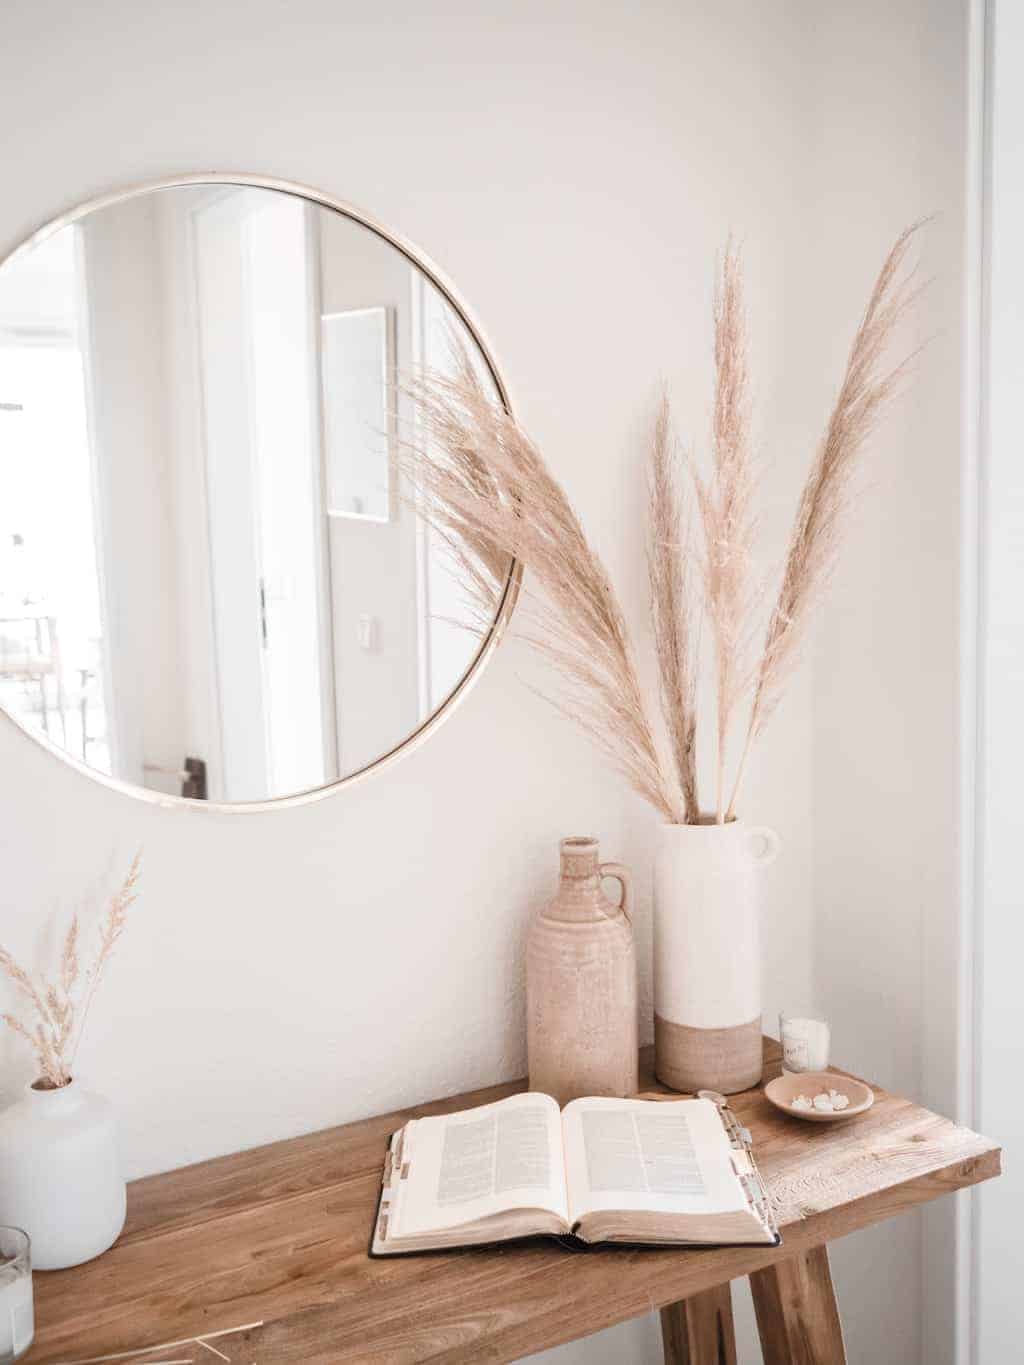 A minimal apartment decorate in a simple boho style